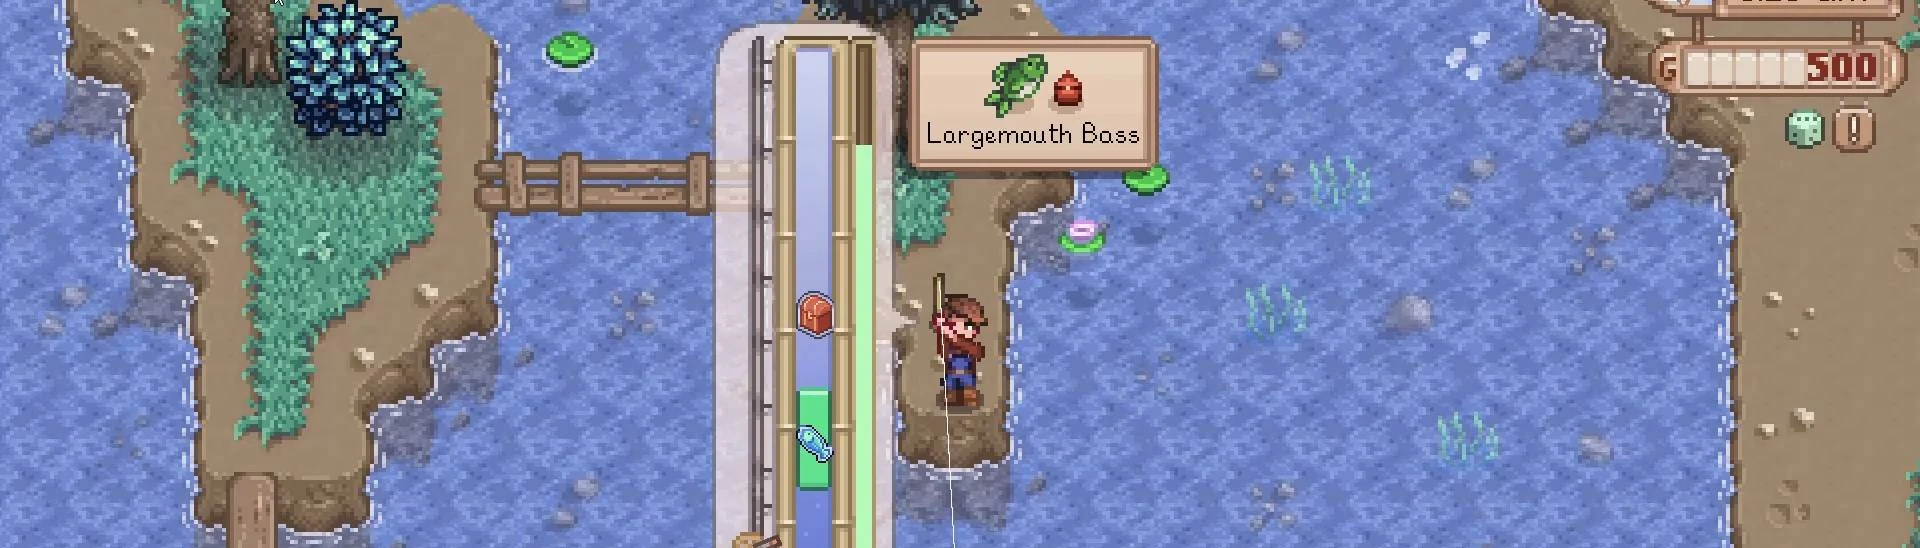 Stardew Valley: Every Lure And What It Does